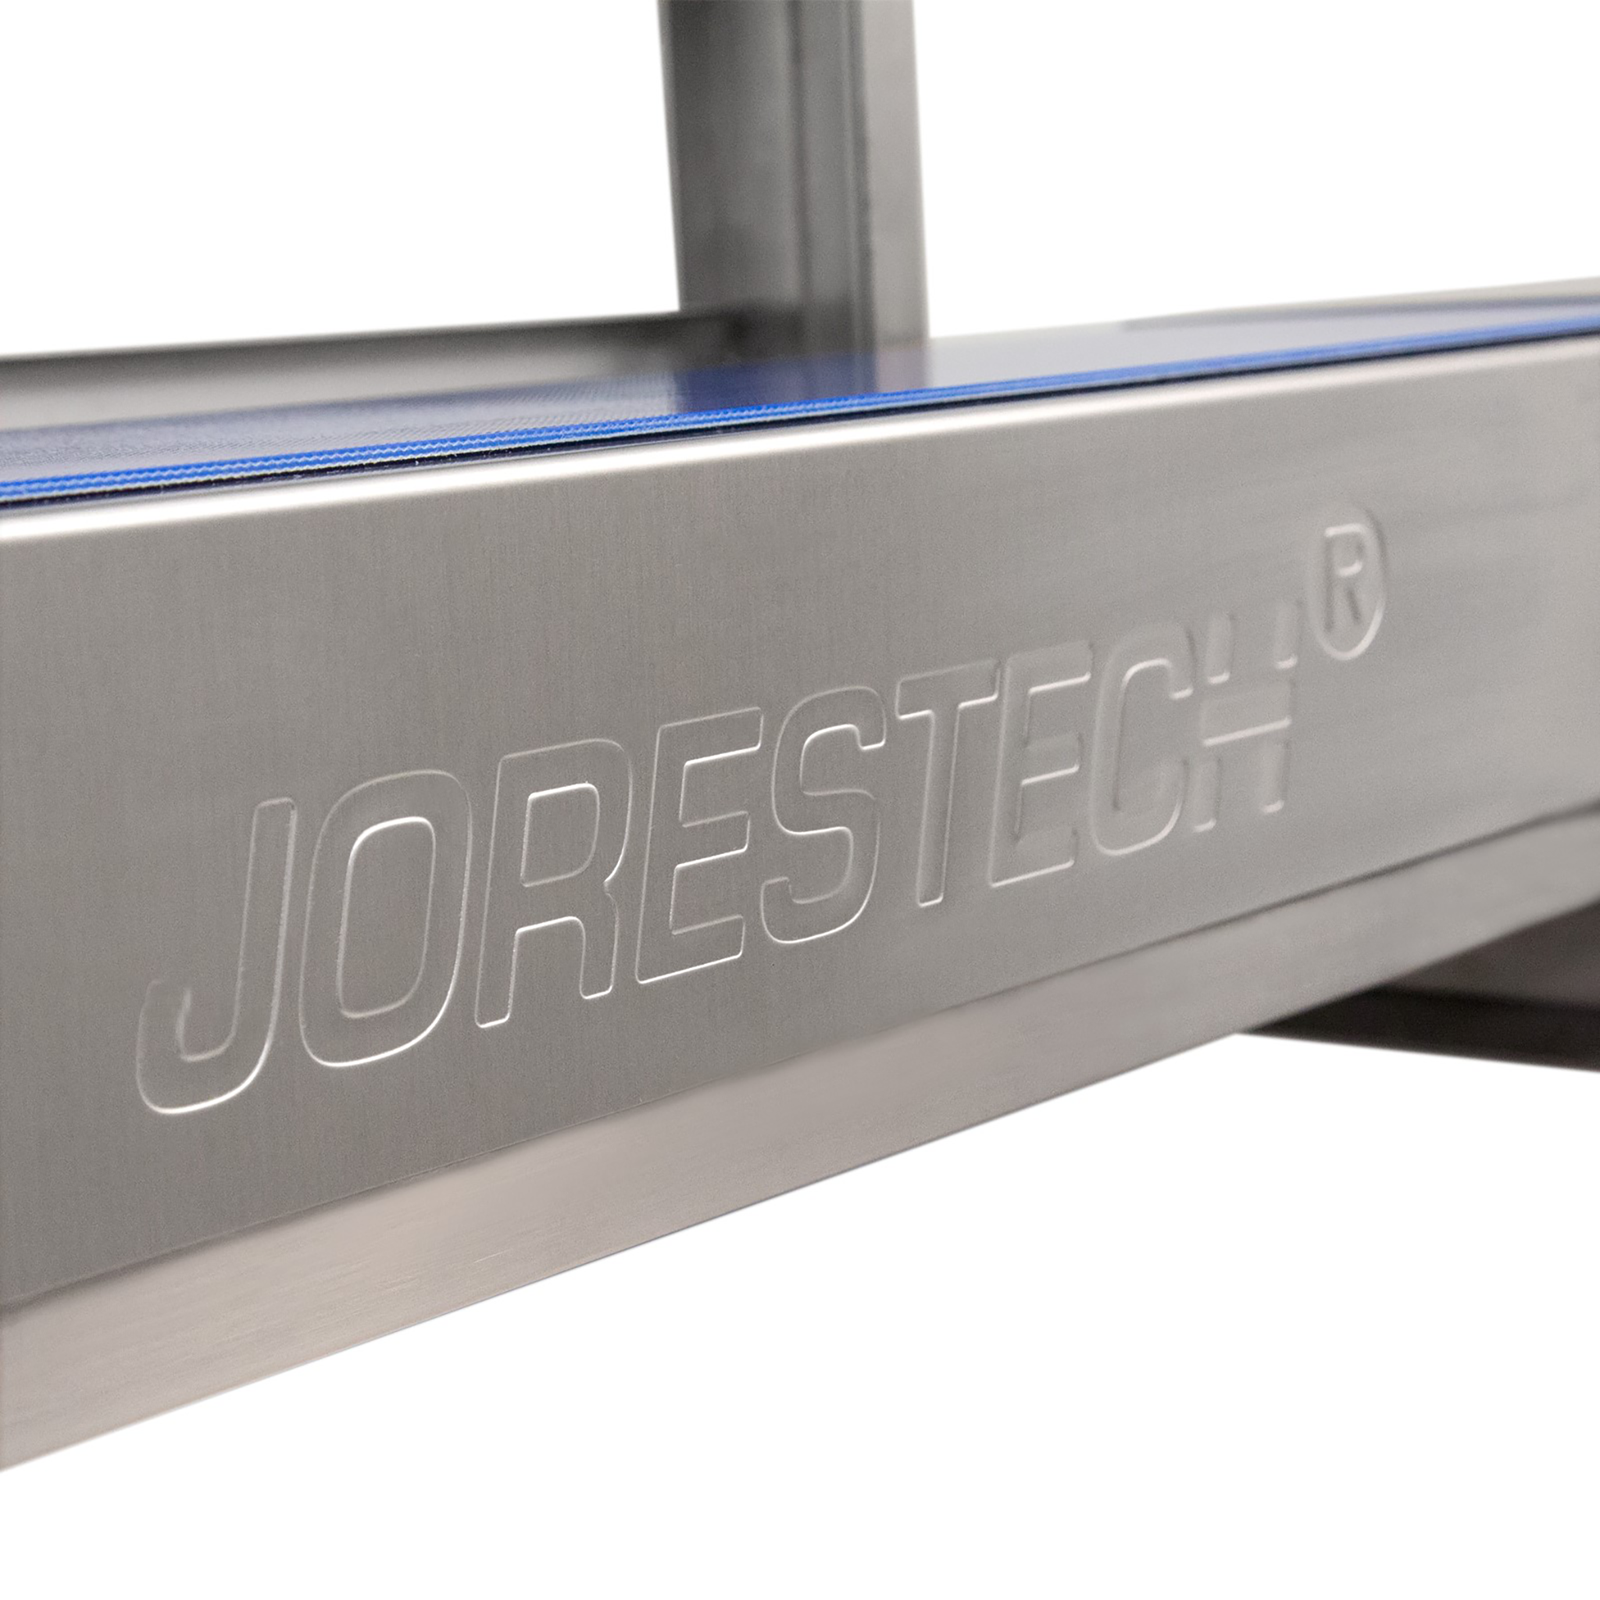 JORES TECHNOLOGIES® logo etched on stainless steel of the continuous band sealer